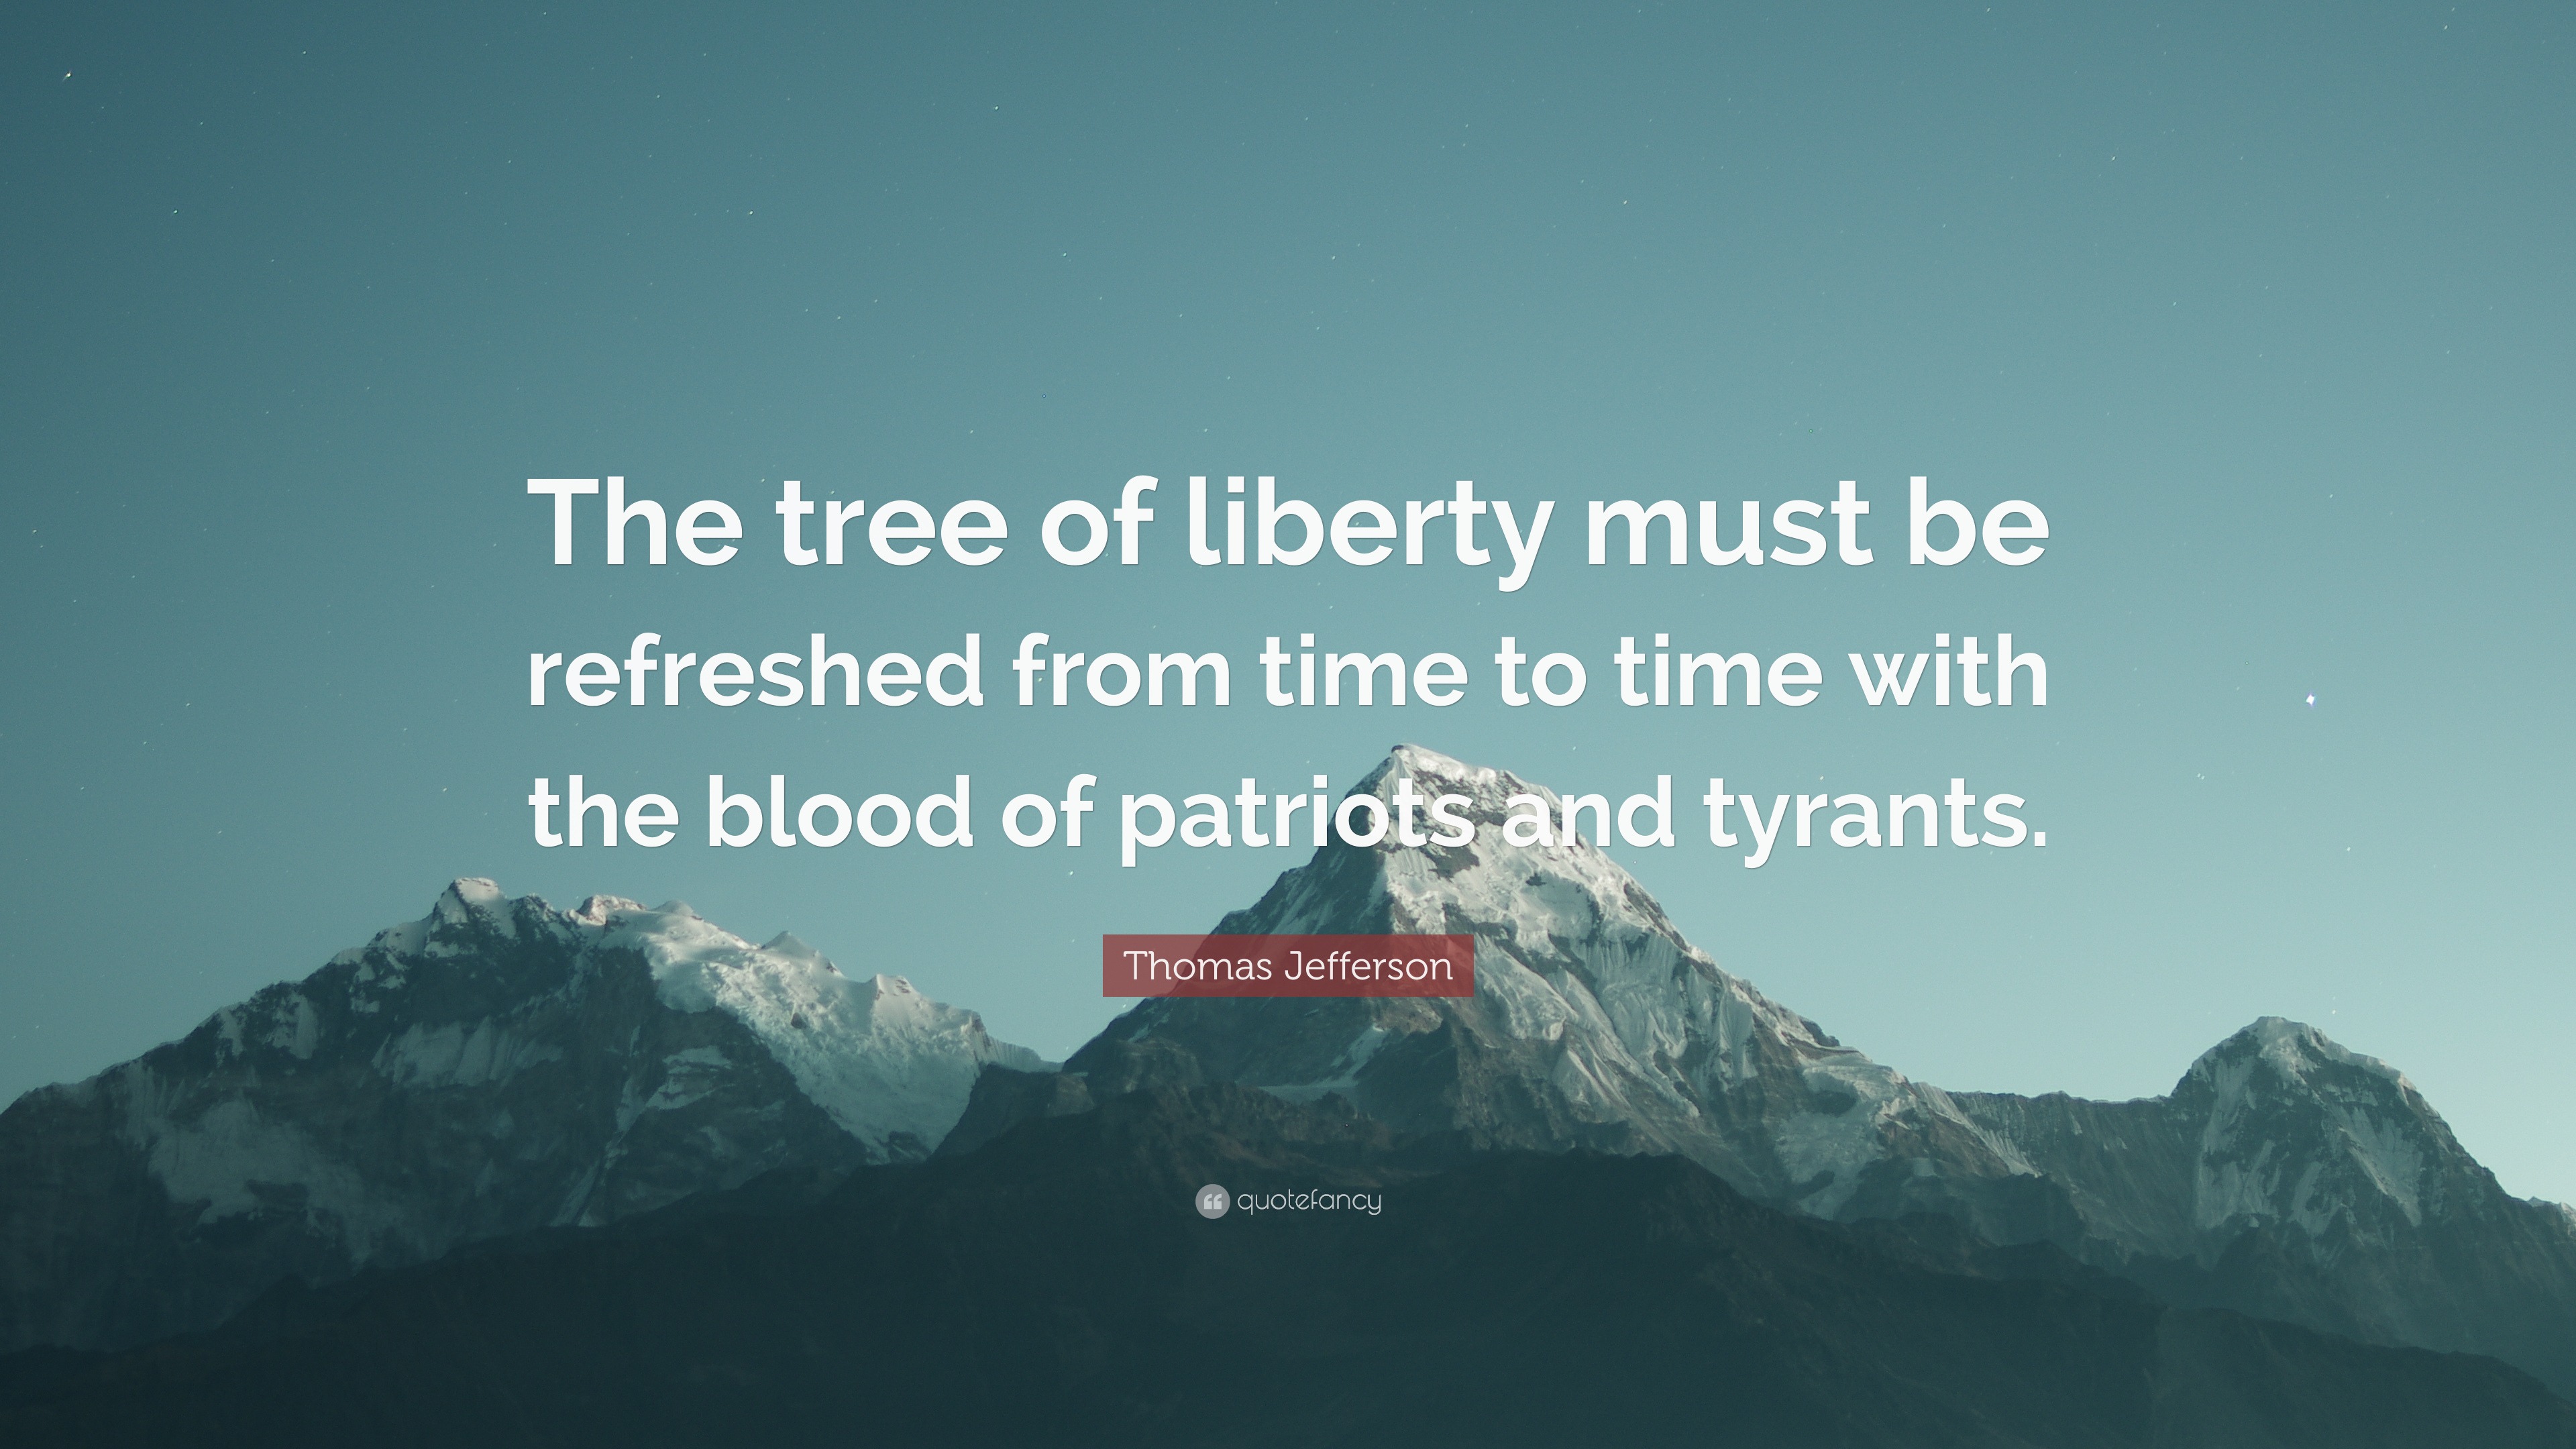 2017220 Thomas Jefferson Quote The tree of liberty must be refreshed from